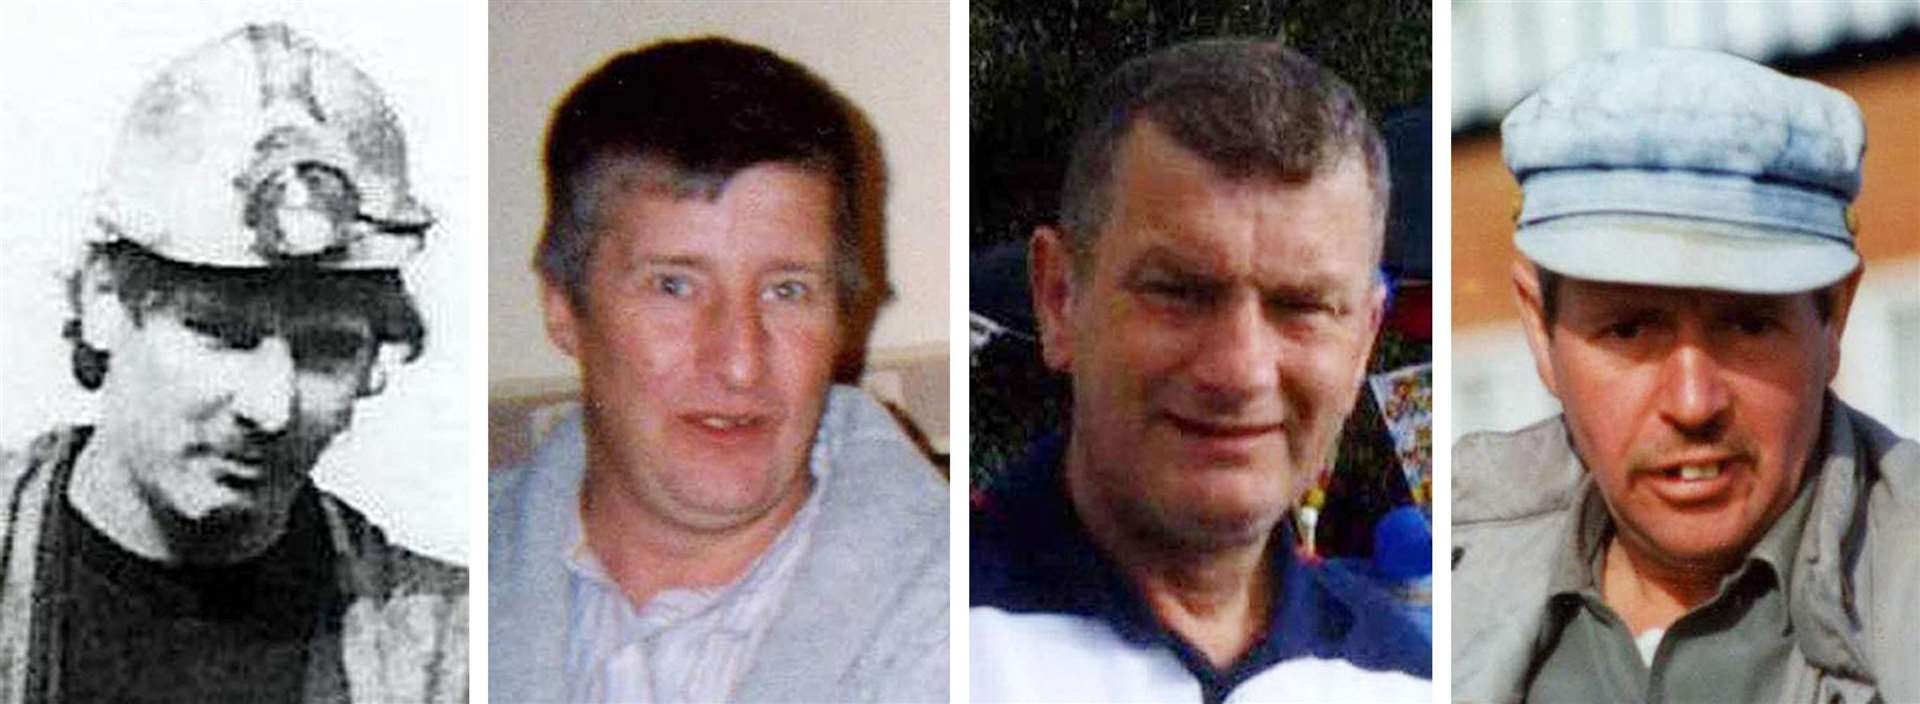 From left Garry Jenkins, 39, Phillip Hill, 45, David Powell, 50, and Charles Breslin, 62, died following an accident at Gleision drift mine, near Pontardawe, South Wales, when a shaft flooded in 2011 (South Wales Police/PA)